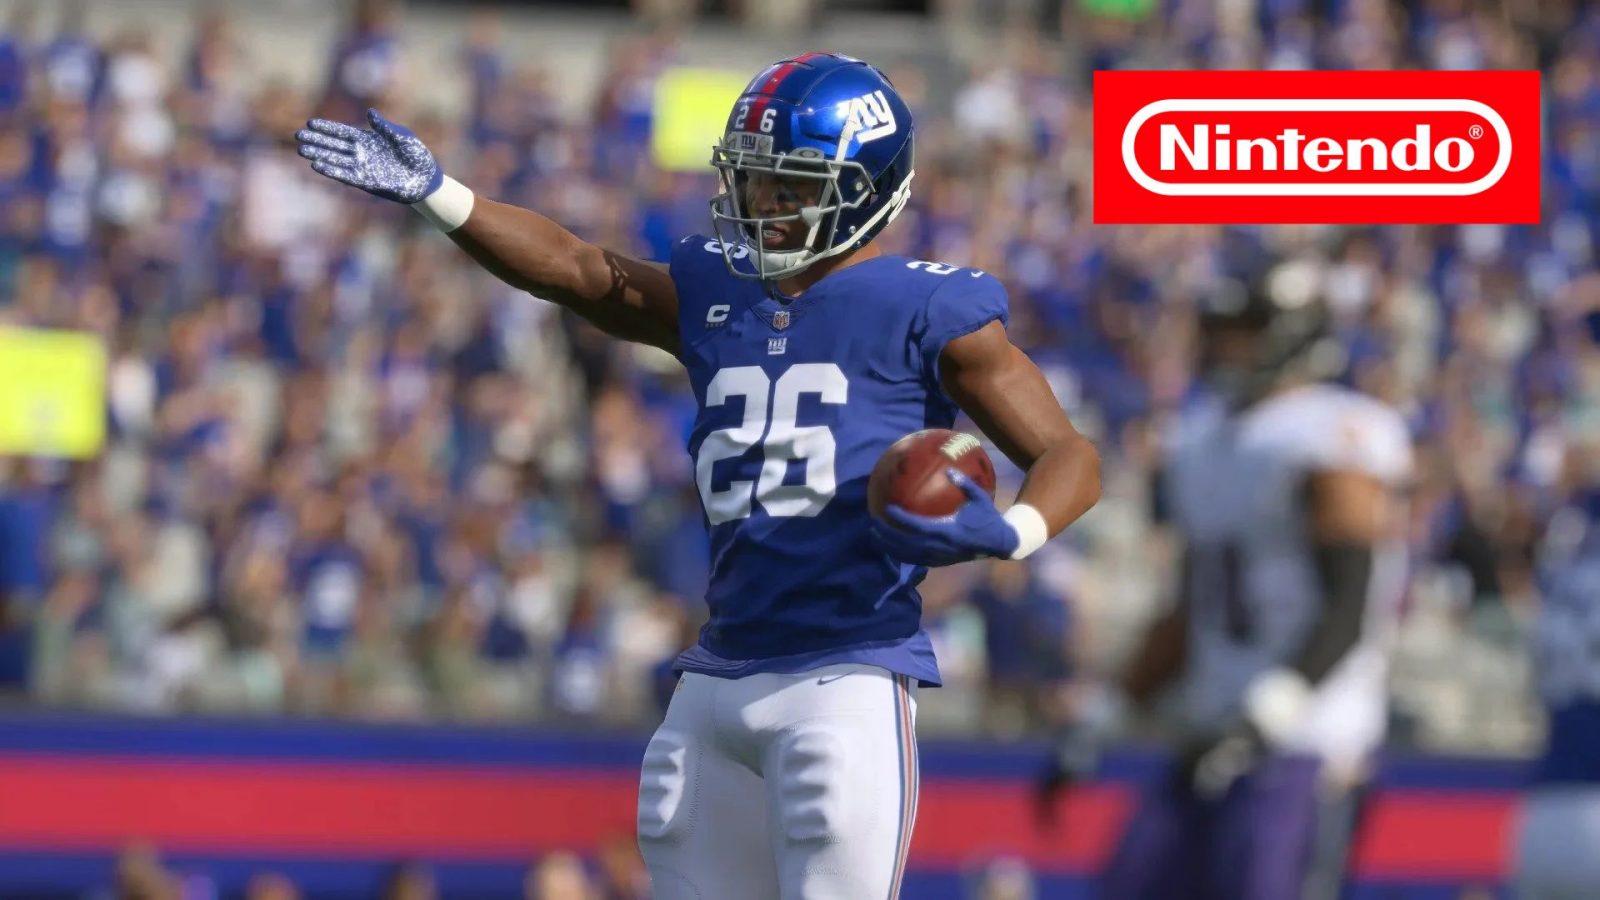 nfl madden 24 player holding ball and nintendo logo